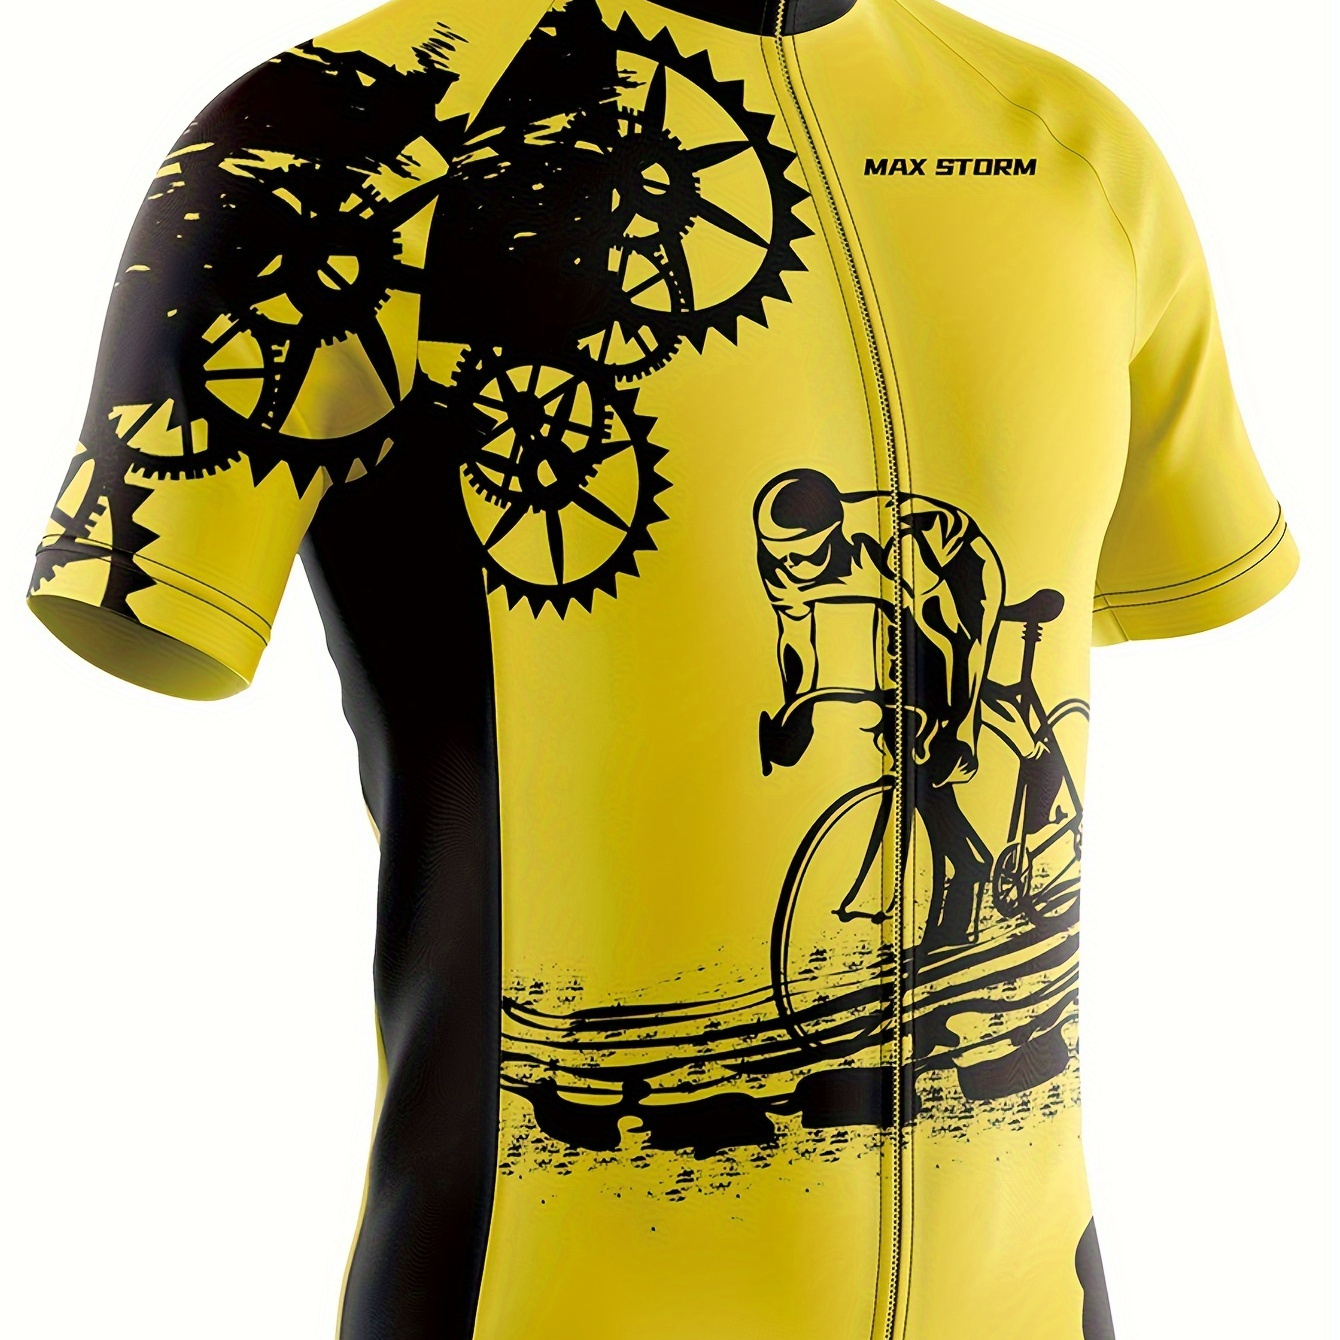 

Men's Cycling Jersey: Riding Bicycle Graphic, Quick Dry, Moisture Wicking, Breathable Short Sleeves Mtb Mountain Bike Shirt For Biking & Riding Sports